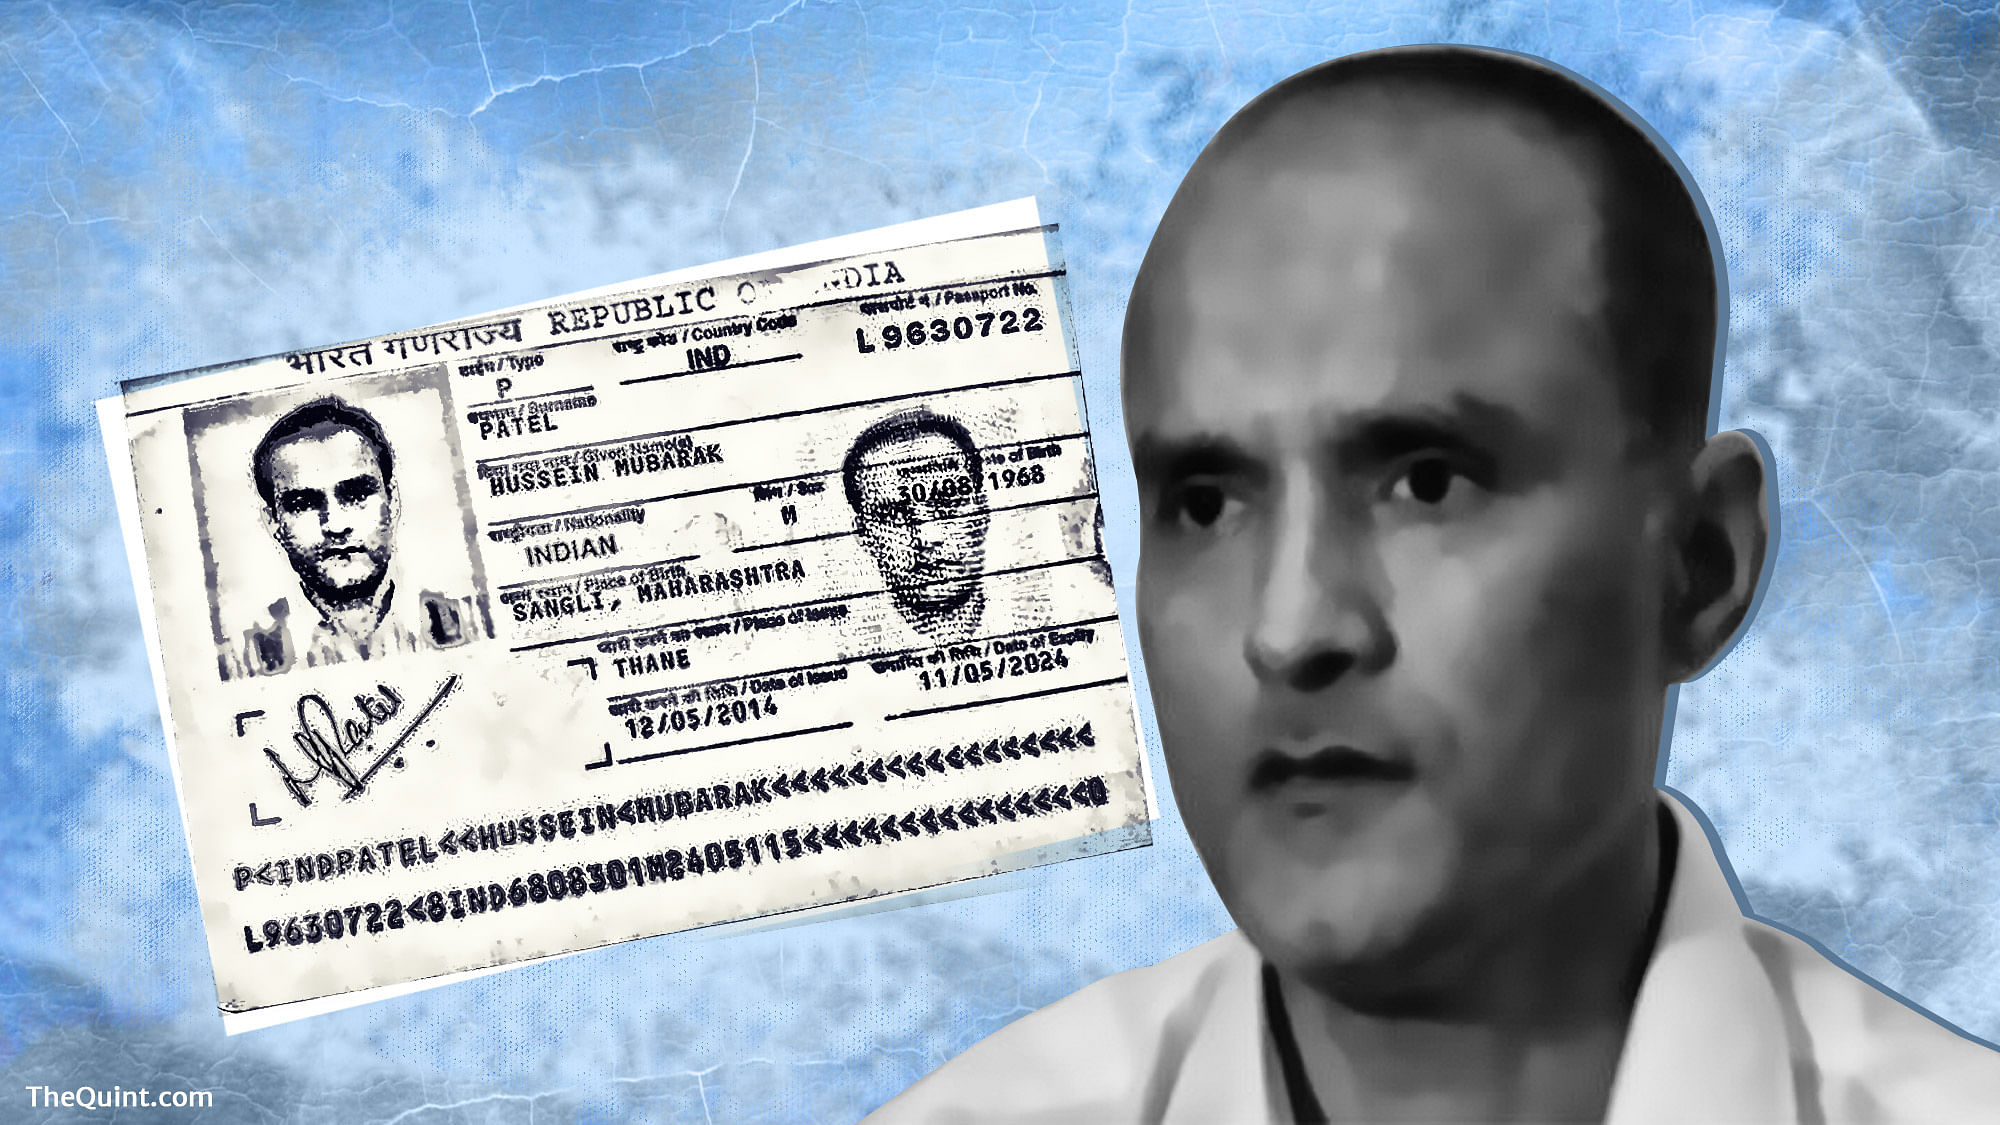 Kulbhushan Jadhav, who Islamabad claims is an Indian spy, was given a death sentence by a Pakistani military court. 